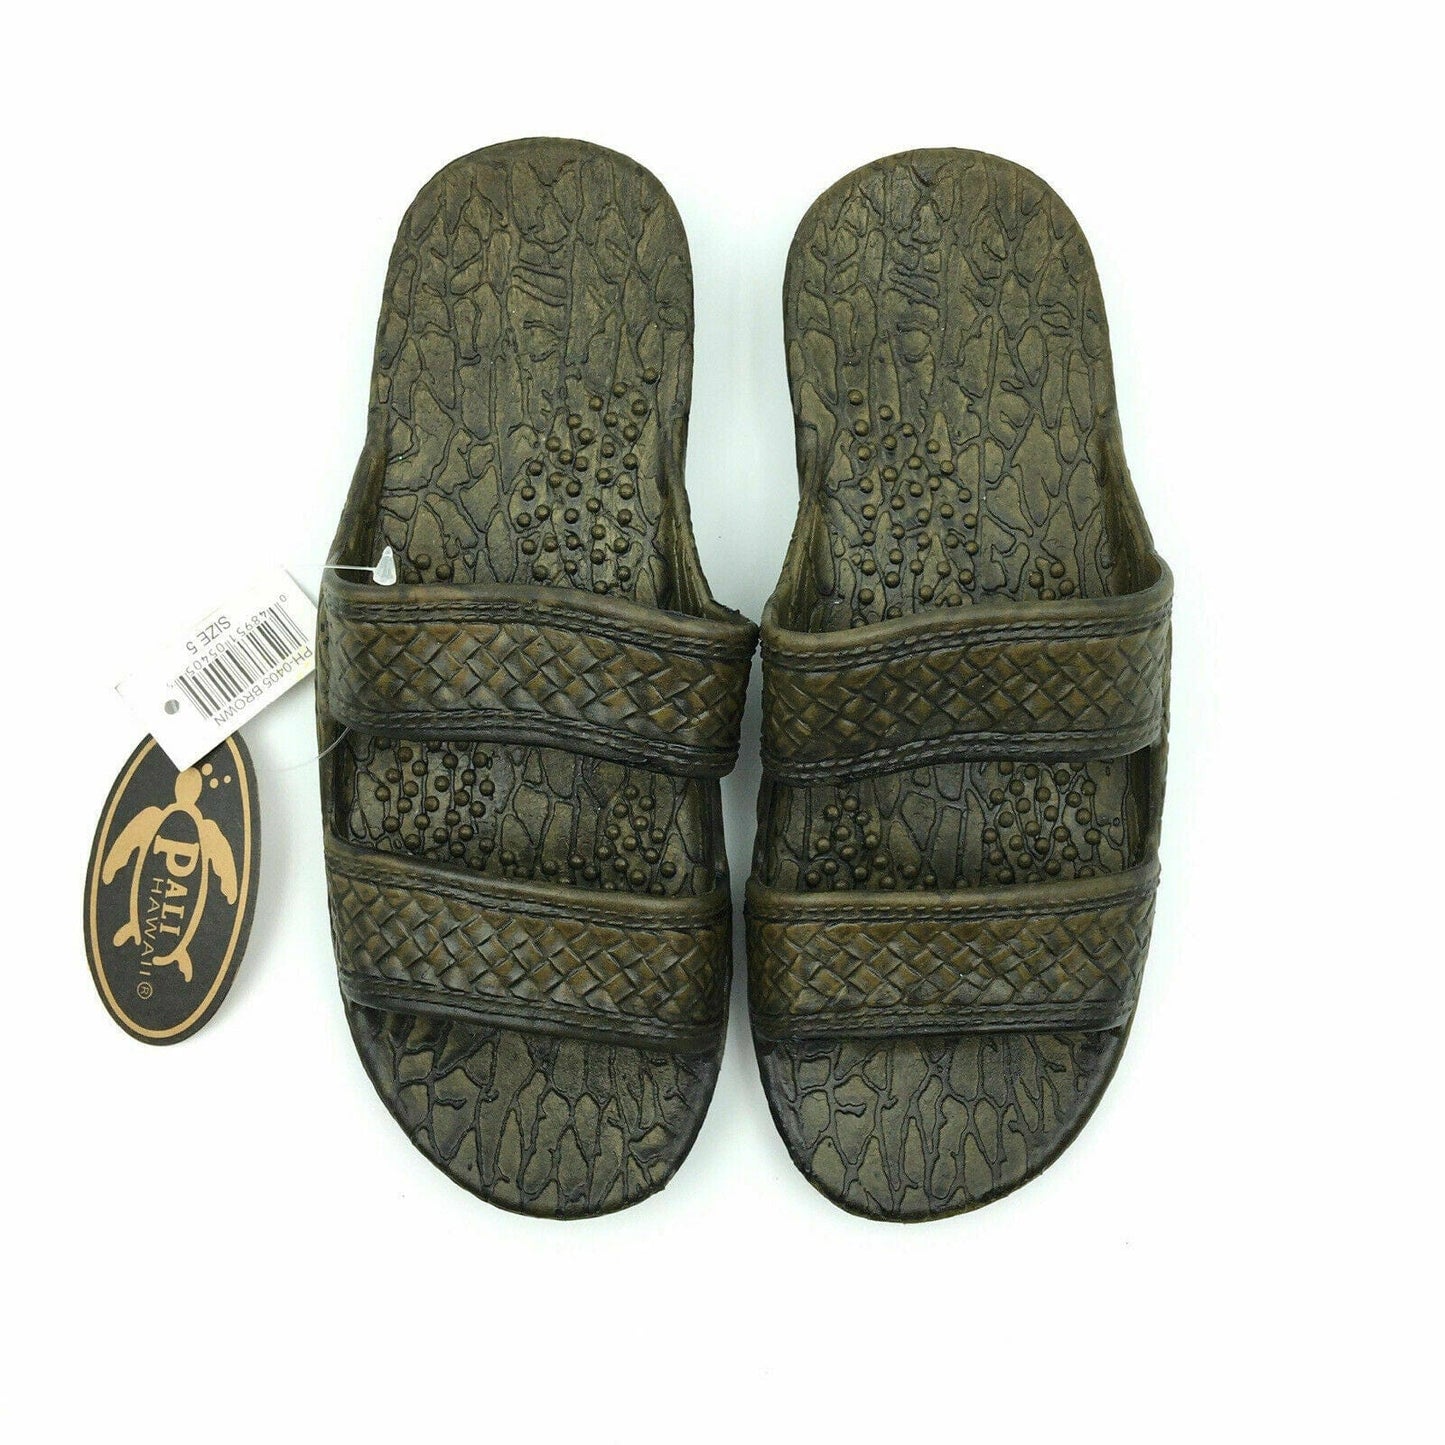 Pali Hawaii Size 5 Brown Rubber Sandals Classic Jandals Slides Shower Shoes